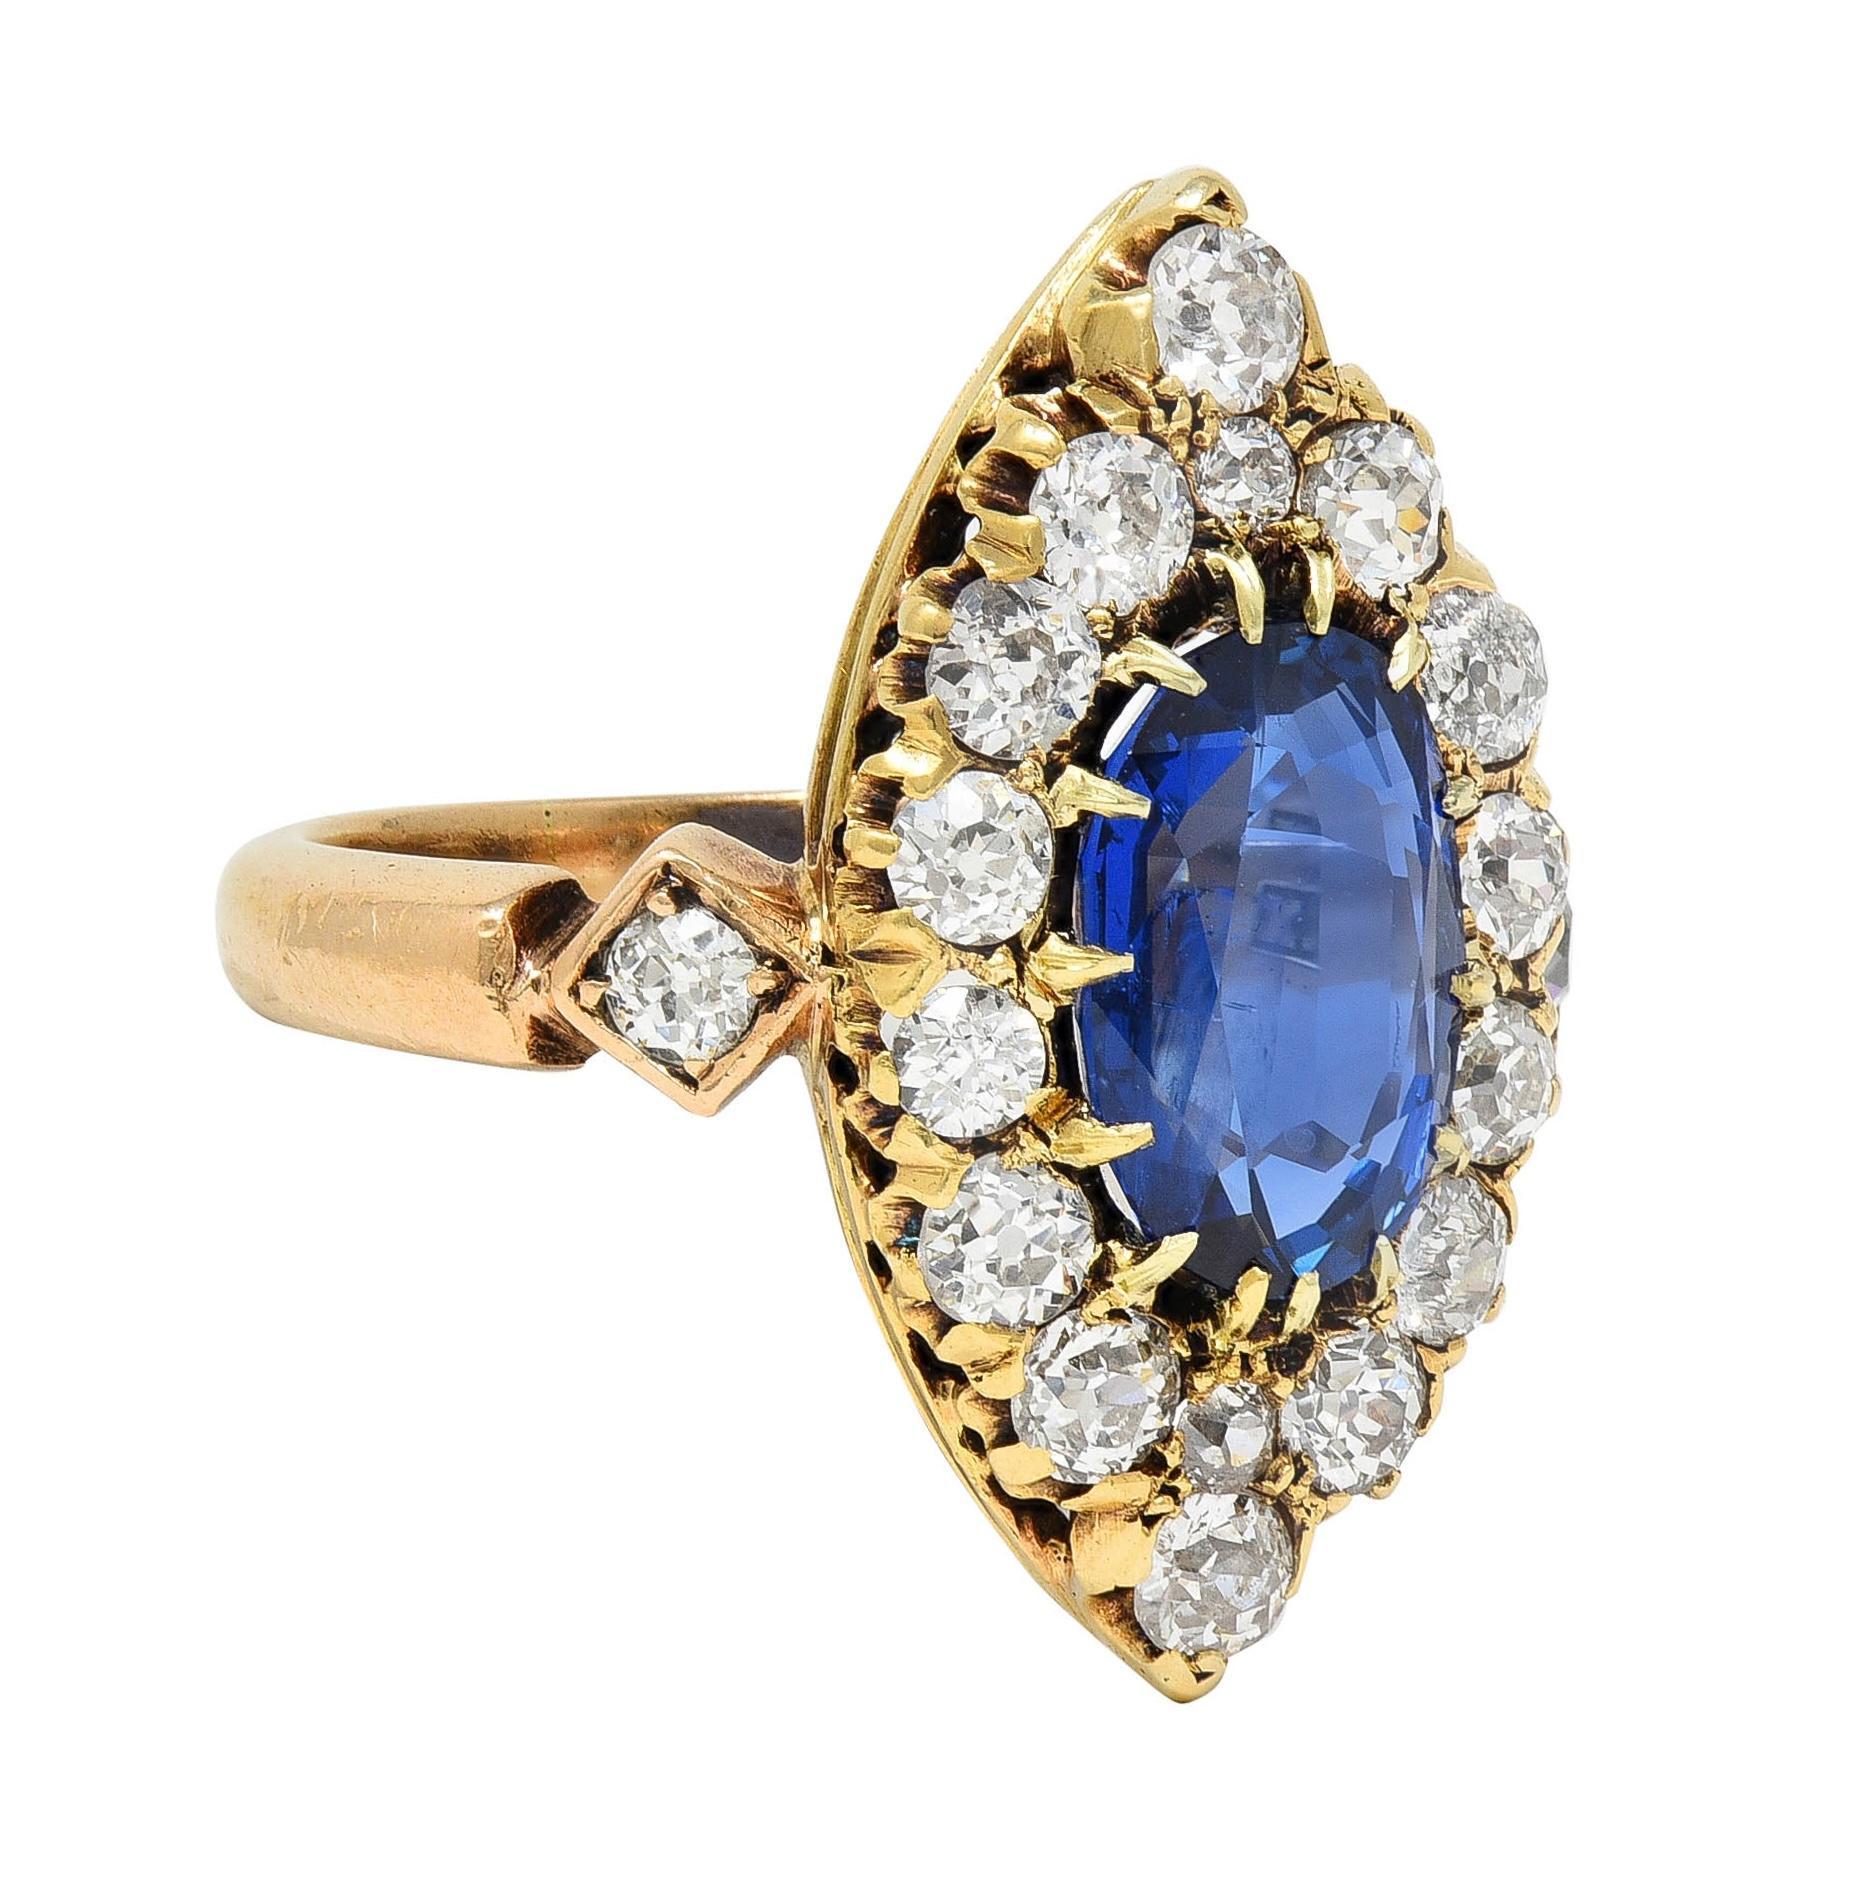 Centering an elongated cushion cut sapphire weighing 2.61 carats - transparent medium blue in color
Natural Burmese in origin with no indications of heat treatment - set with talon prongs in navette form
Featuring a navette-shaped surround prong set